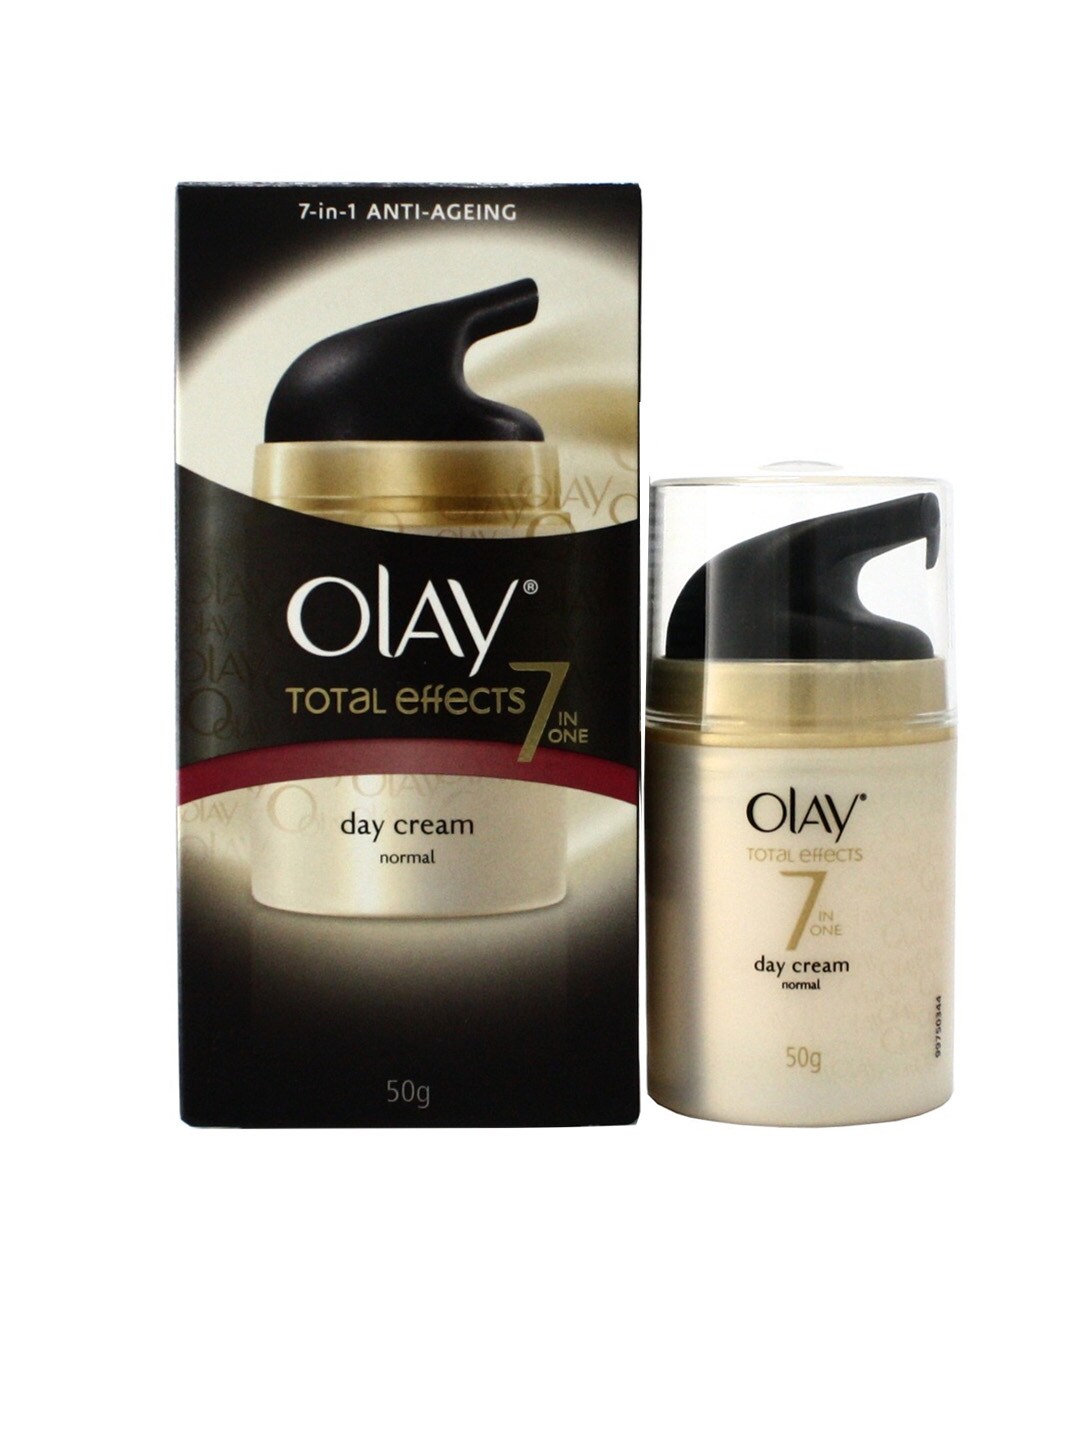 Olay Women Total Effects 7 in One Normal Day Cream